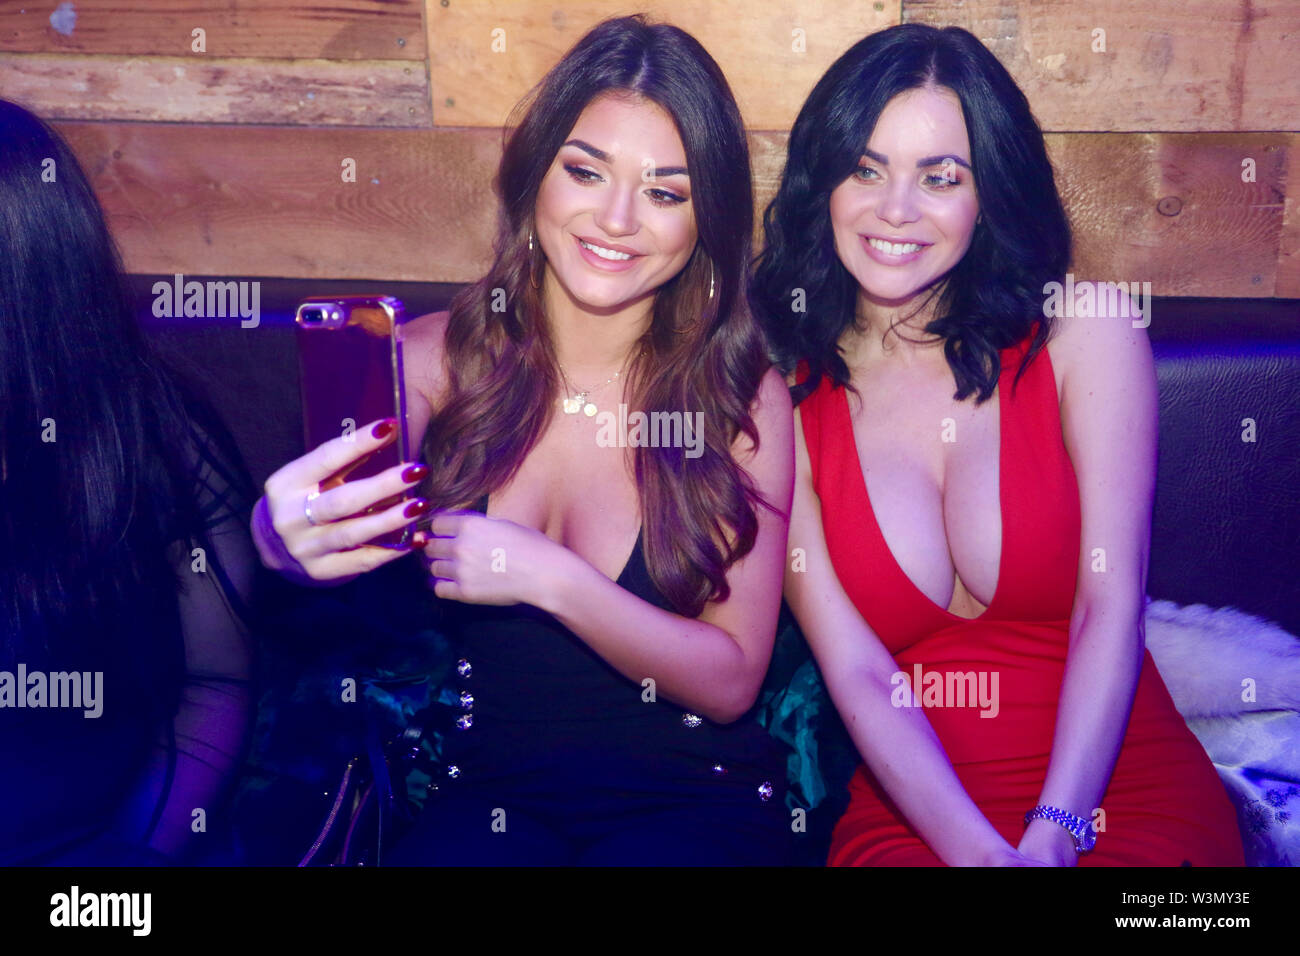 India Reynolds partying with Page 3 girl friends Emma glover and Scarlett Howard at nightclub/bar Twisted Monkey on Boxing Day 2018. Stock Photo